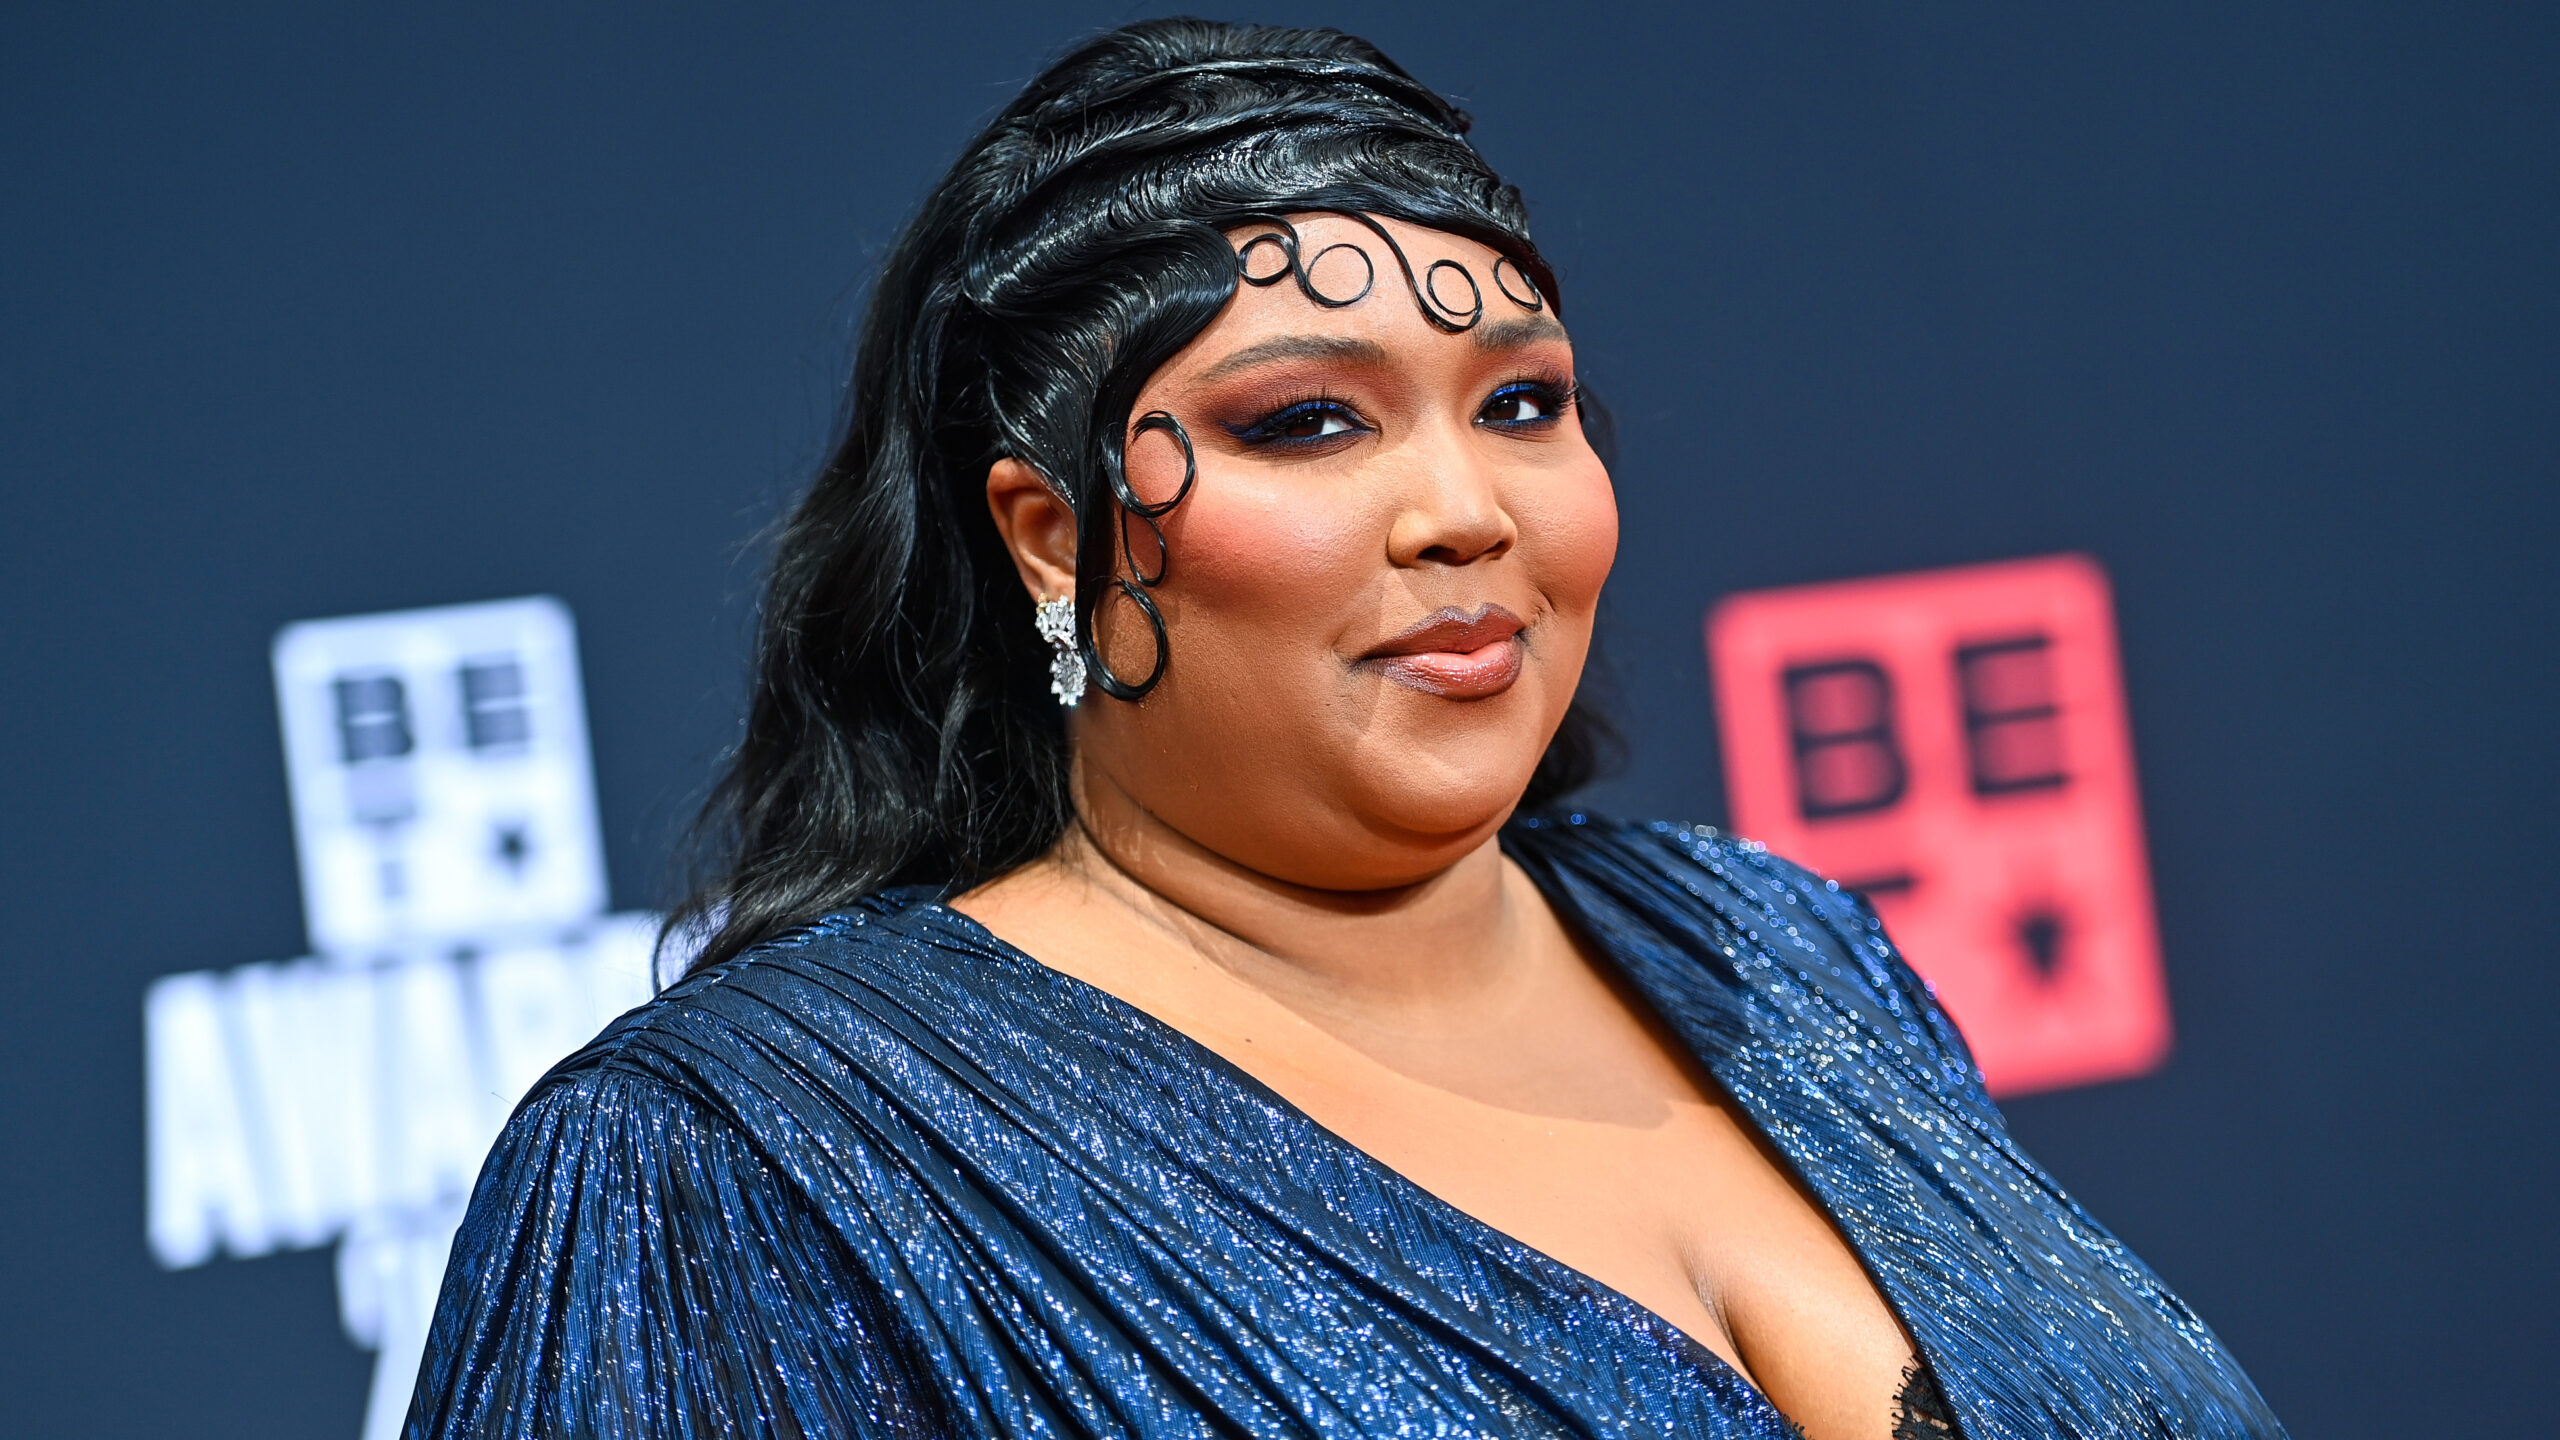 Lizzo hints at departing due to feeling constantly targeted as the punchline